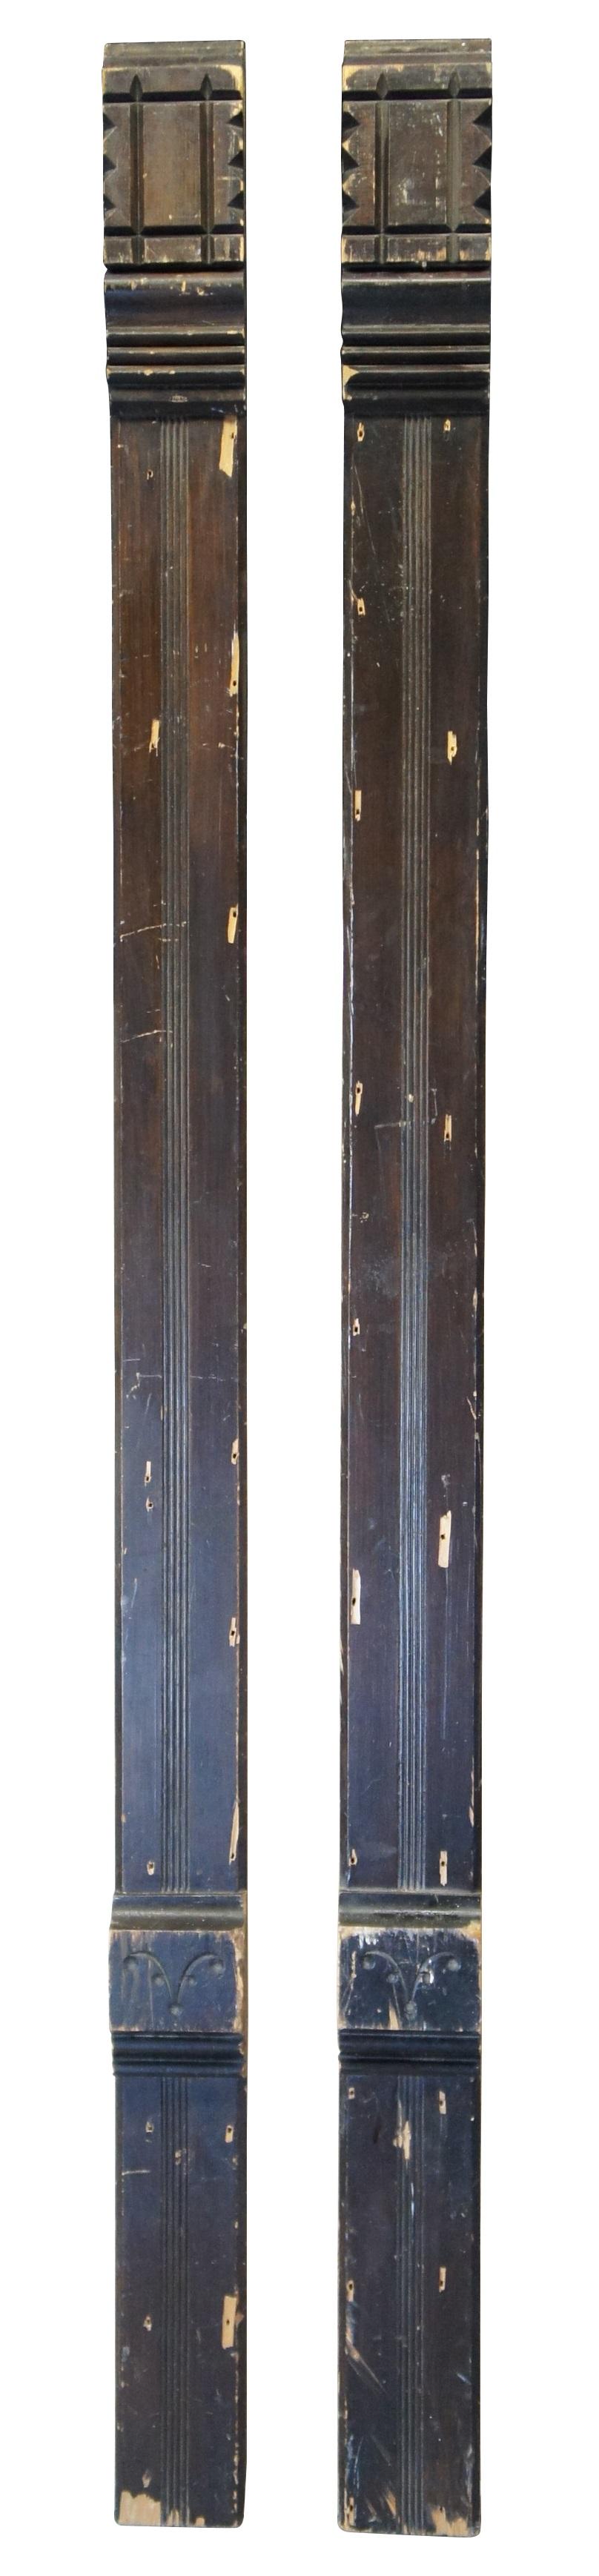 Pair of victorian eastlake architectural moldings. Features a sawtooth block leading to corbel and long fluted panel. 
 